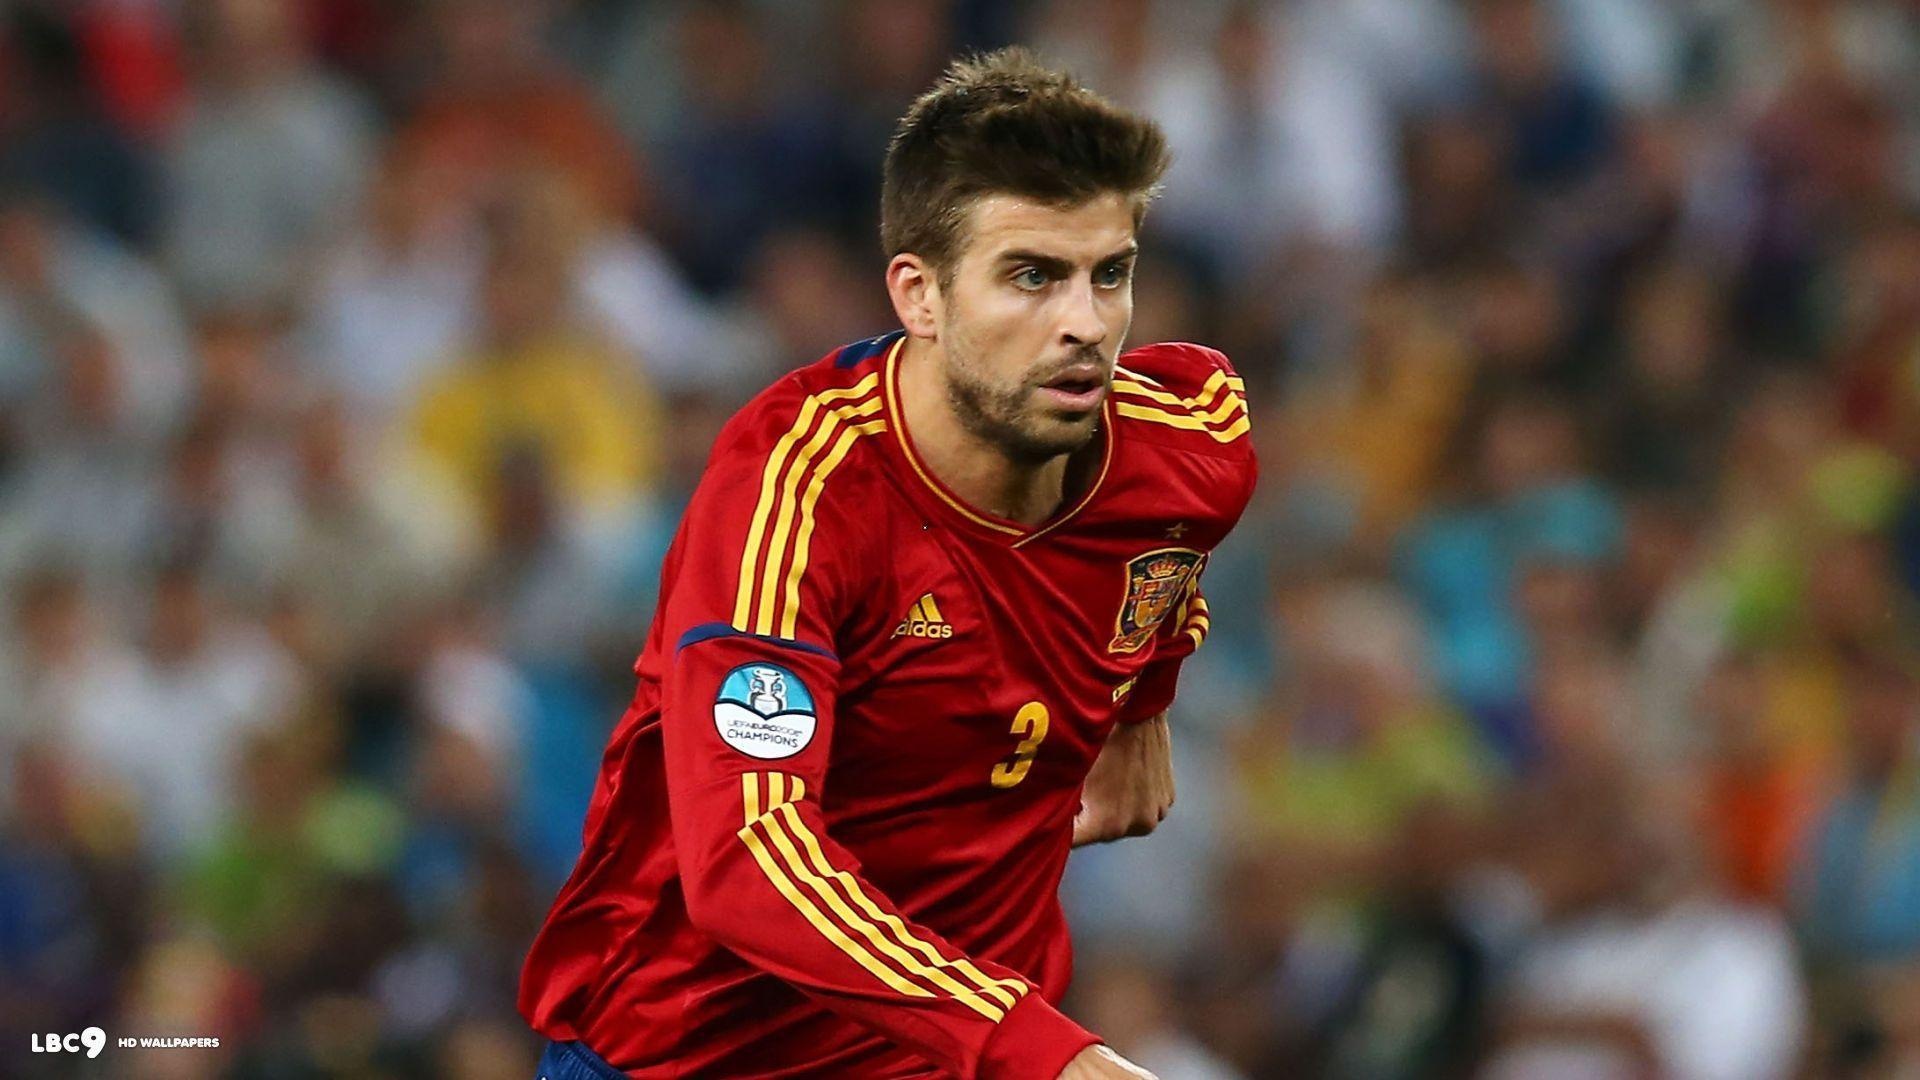 Gerard Pique: Played football for Barcelona, Manchester United, and the Spanish national team. 1920x1080 Full HD Background.